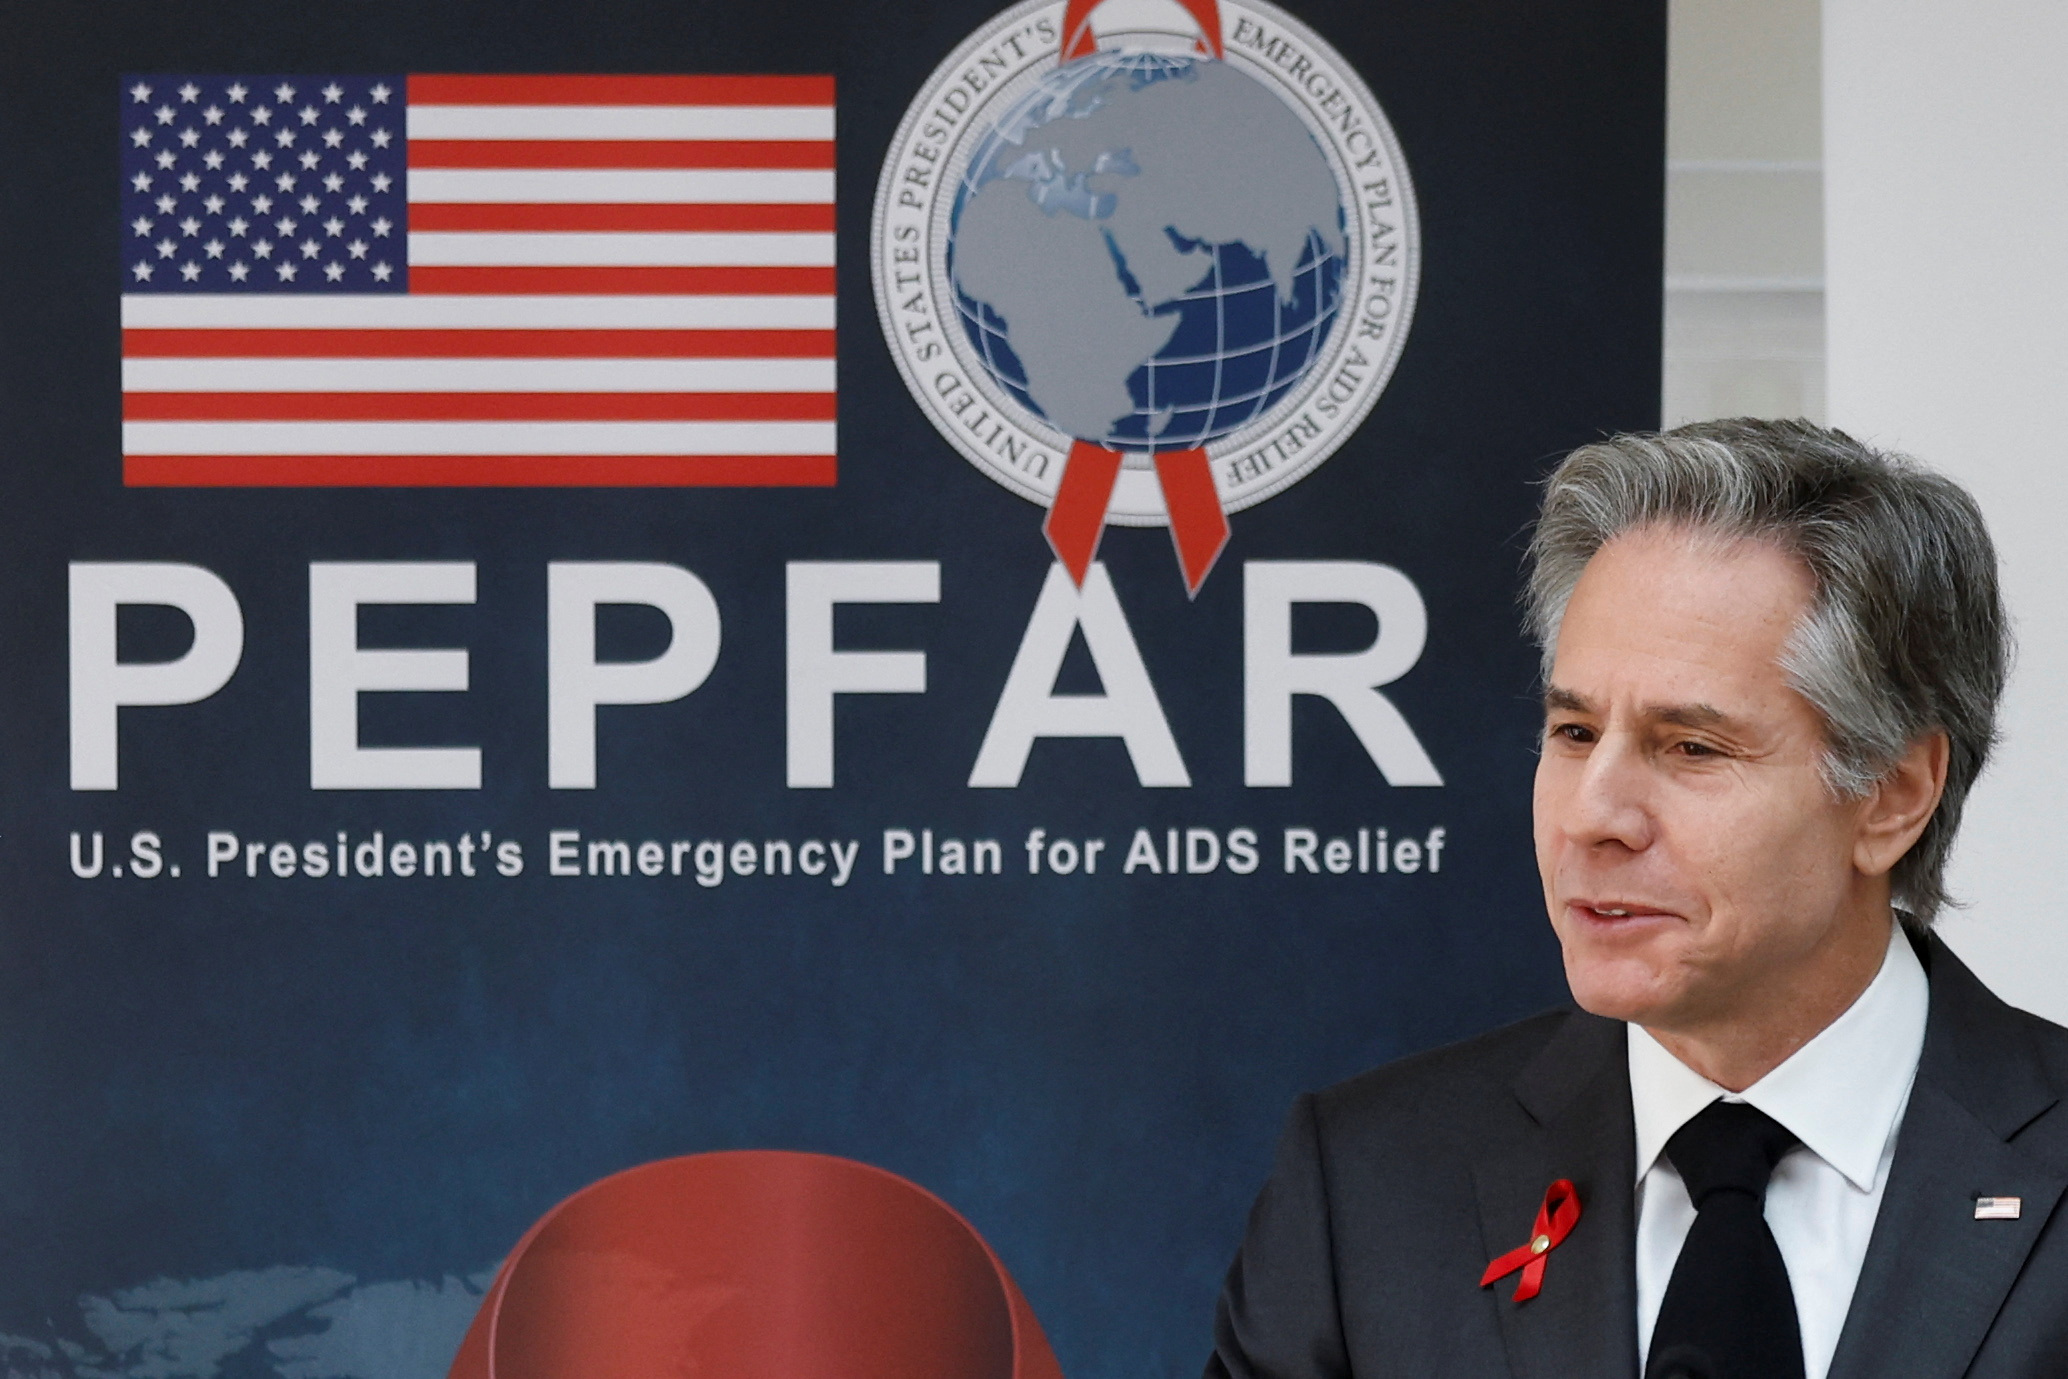 U.S. Secretary of State Blinken delivers remarks on PEPFAR at World AIDS Day event in Washington